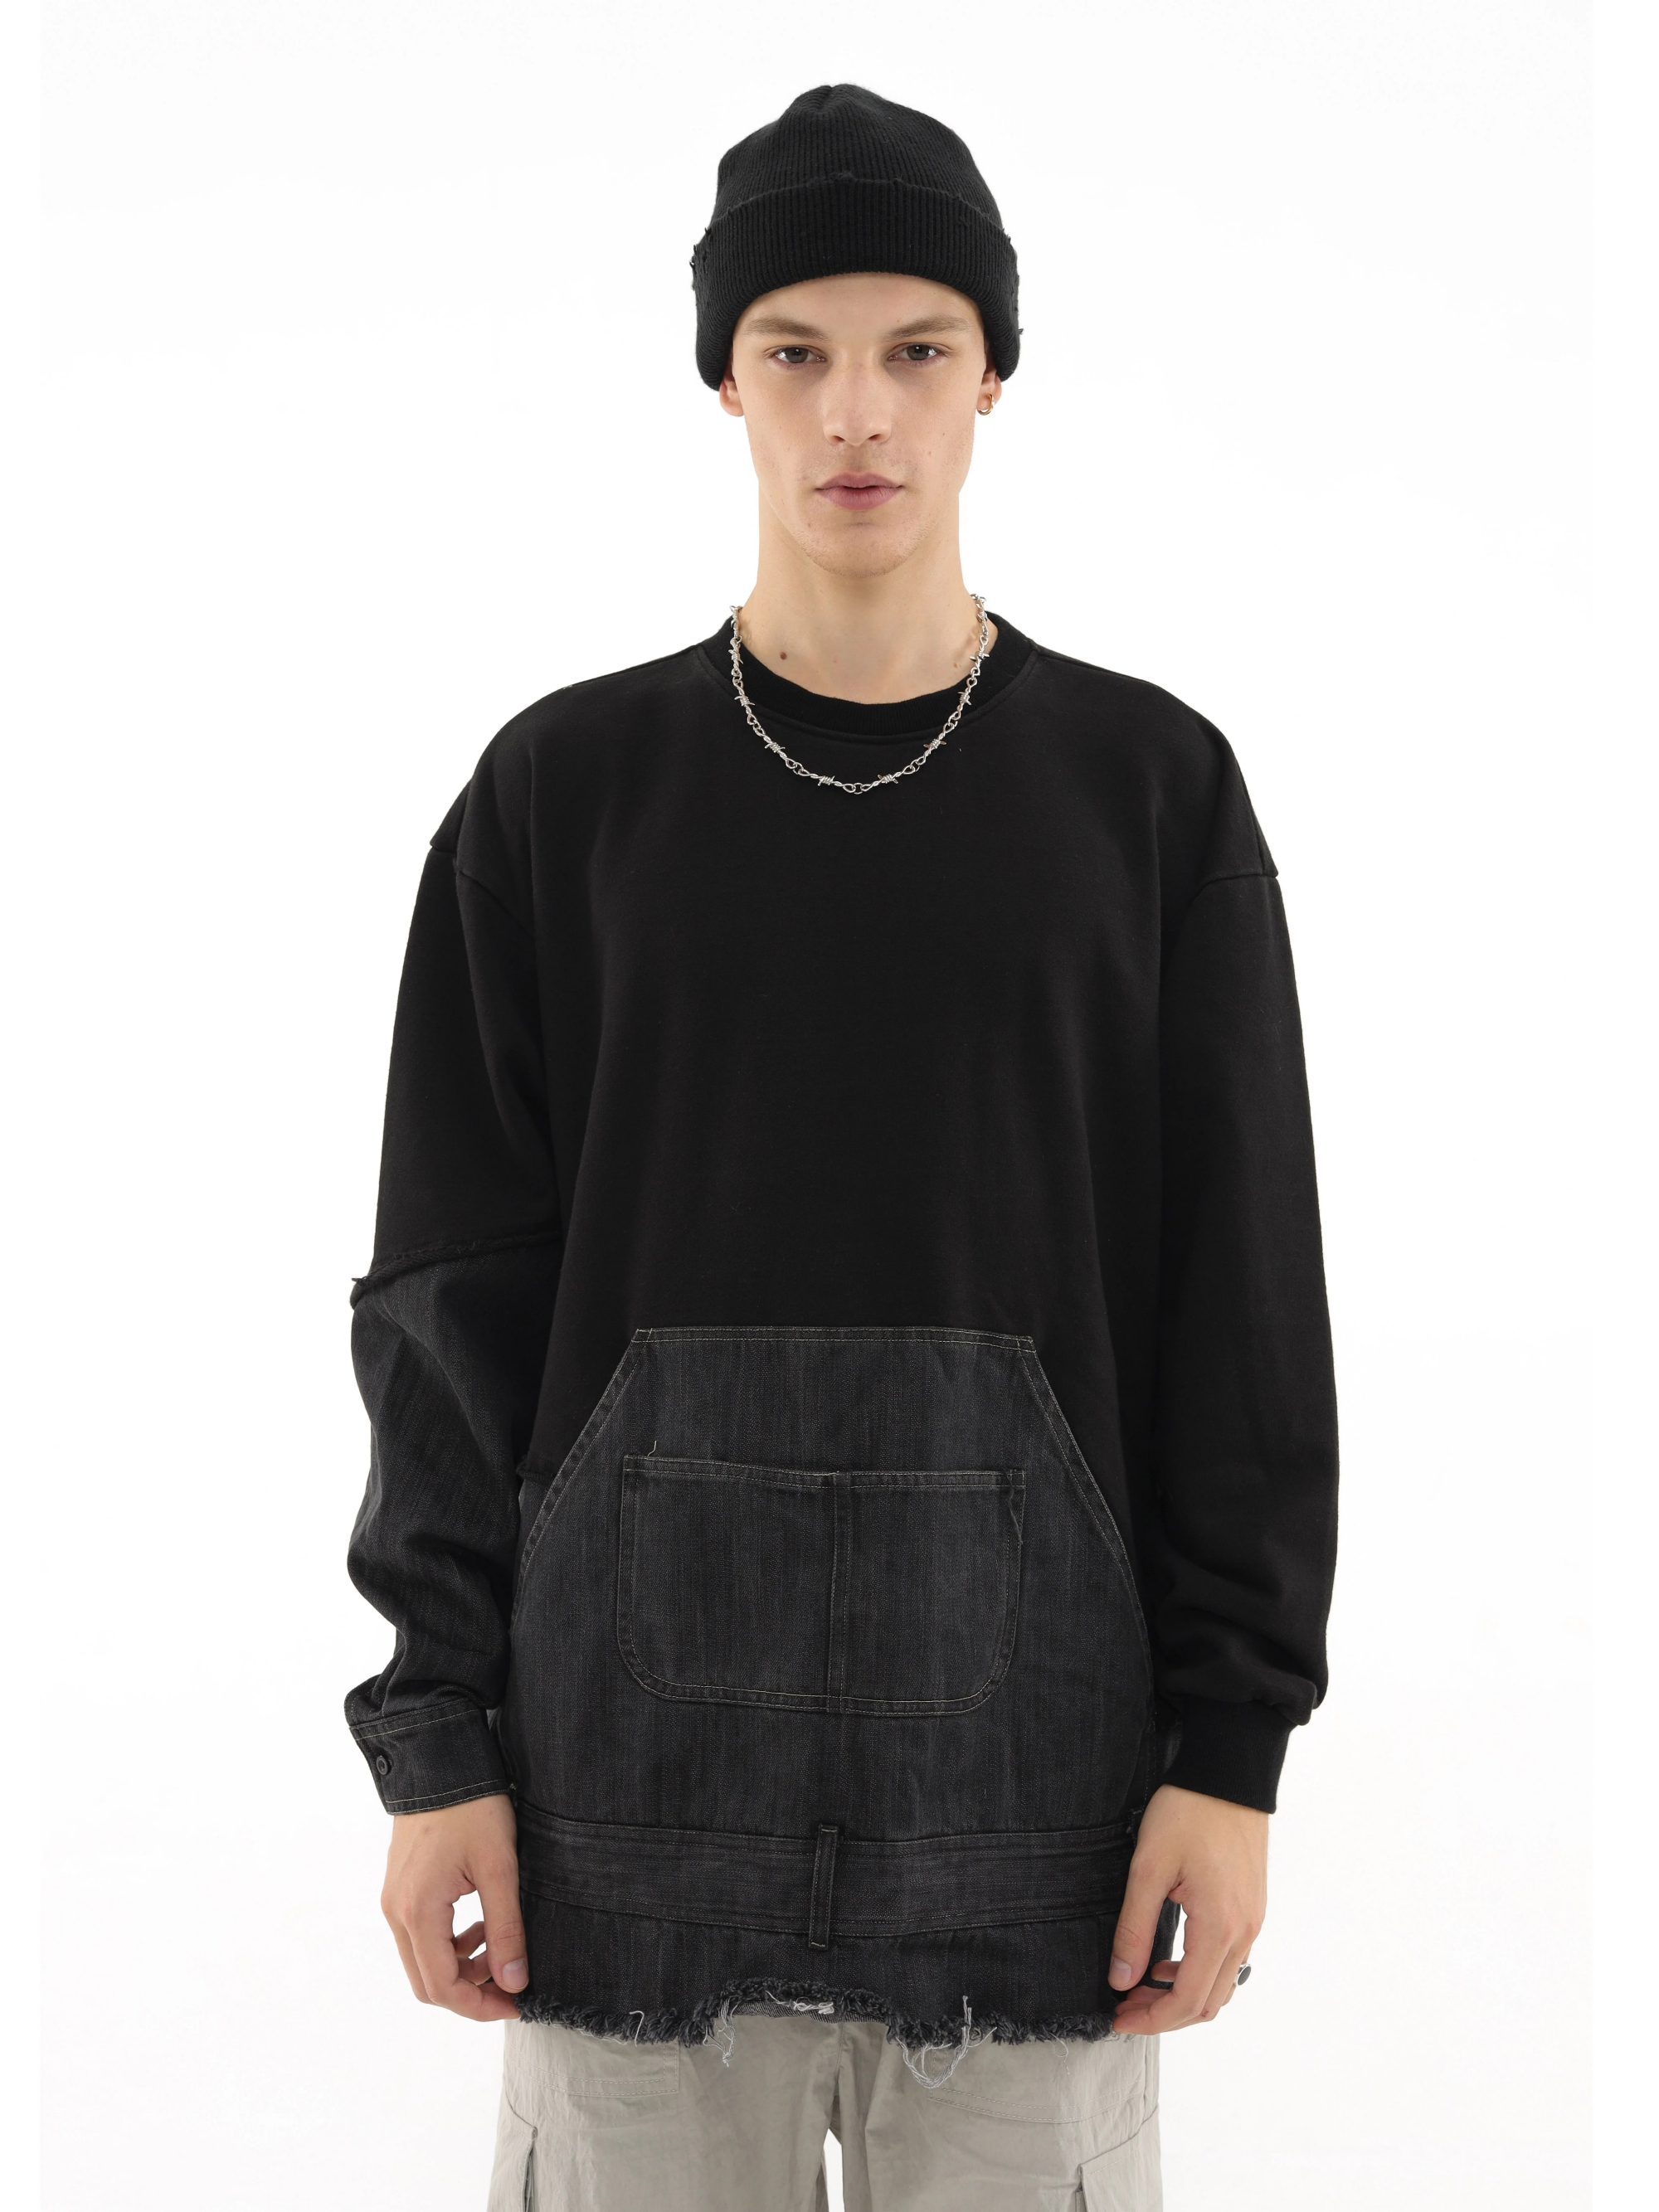 NormCoreMoment 19FW Heavy Washing Black Jeans Stitching Knitted Sweaters